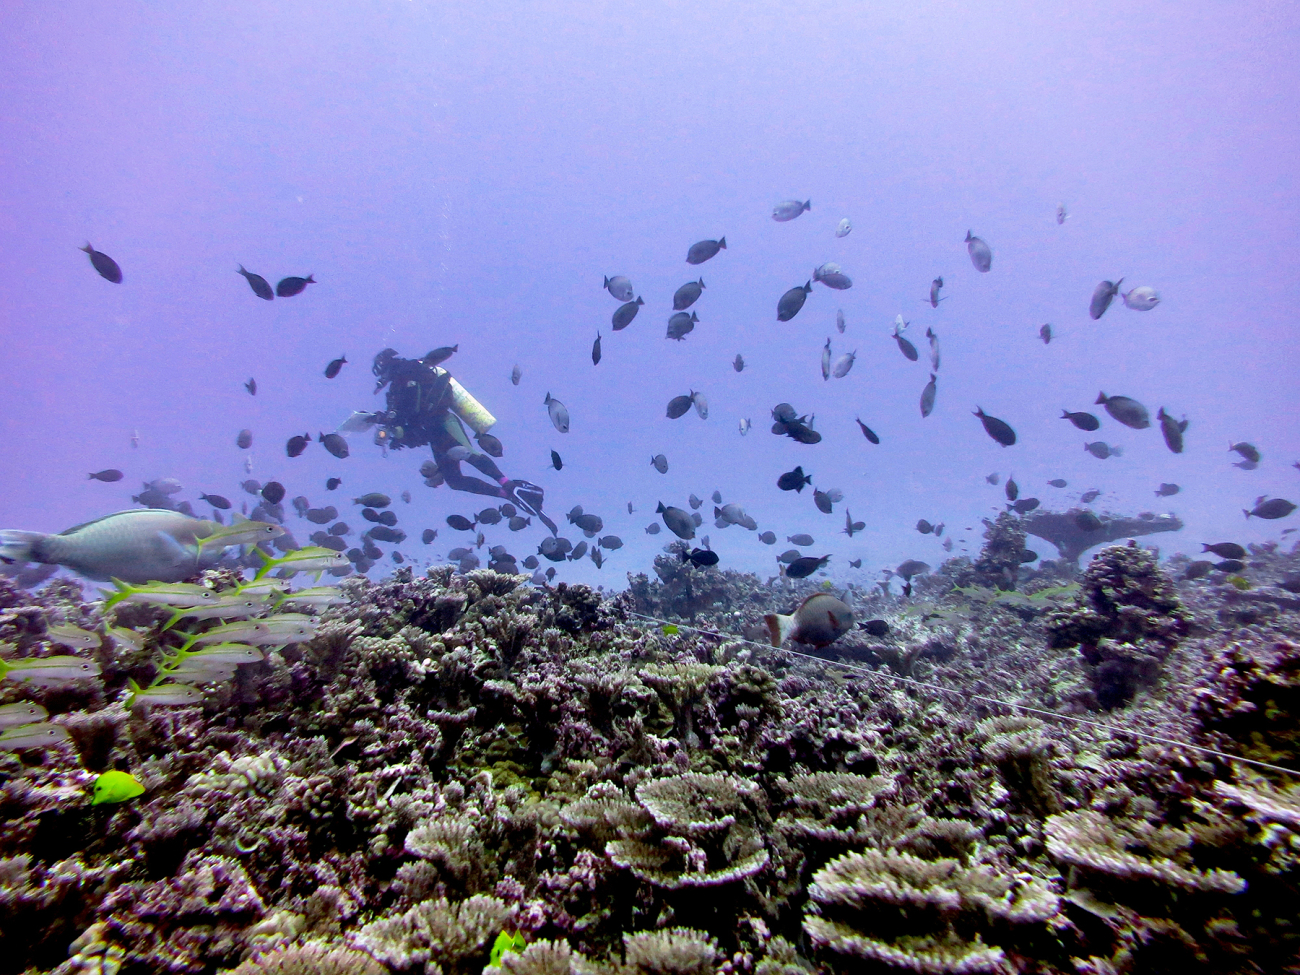 Fish Rapid Environmental Assessment (REA) diver collecting data on fishspecies ID, sizes, and abundance at Johnston Atoll